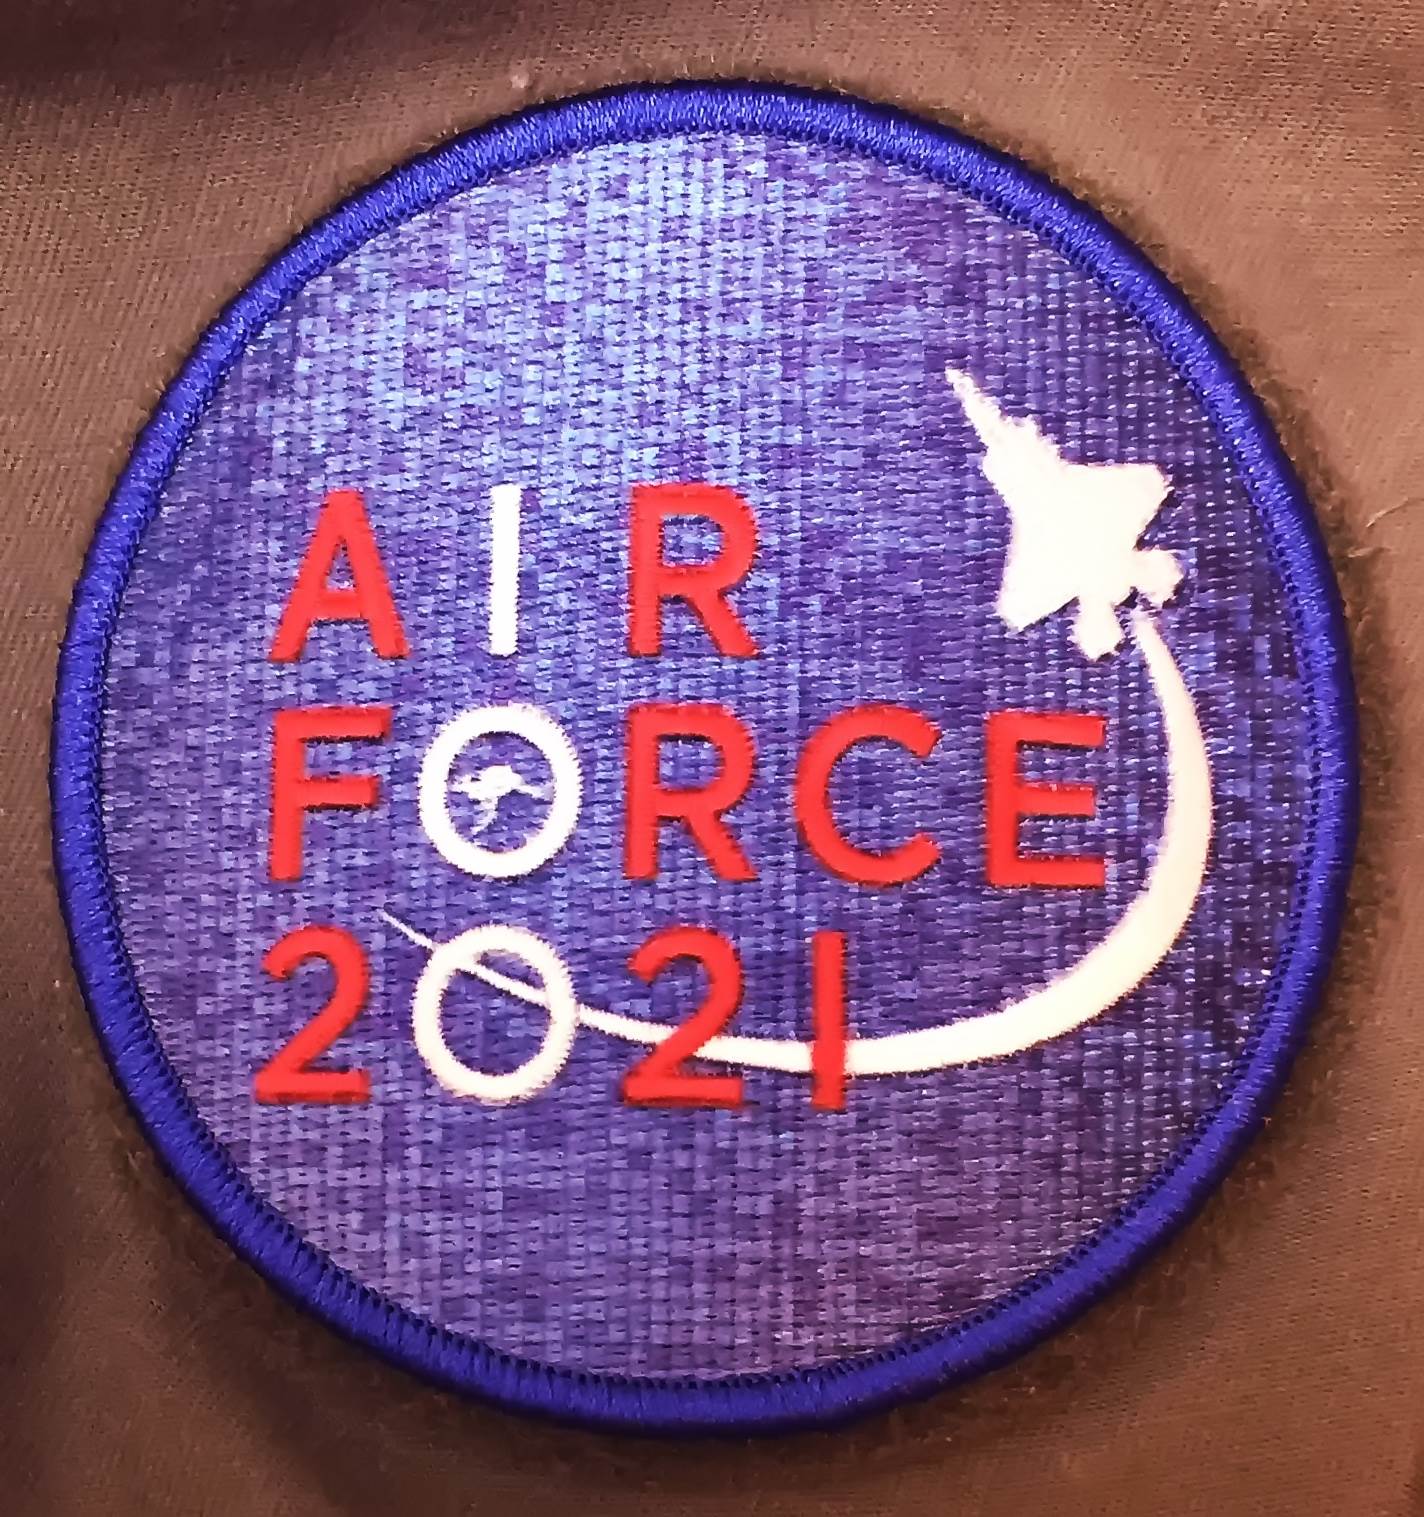 Air Force 100 Embroidered Patch Air Force 100 Embroidered Patch by johntorcasio